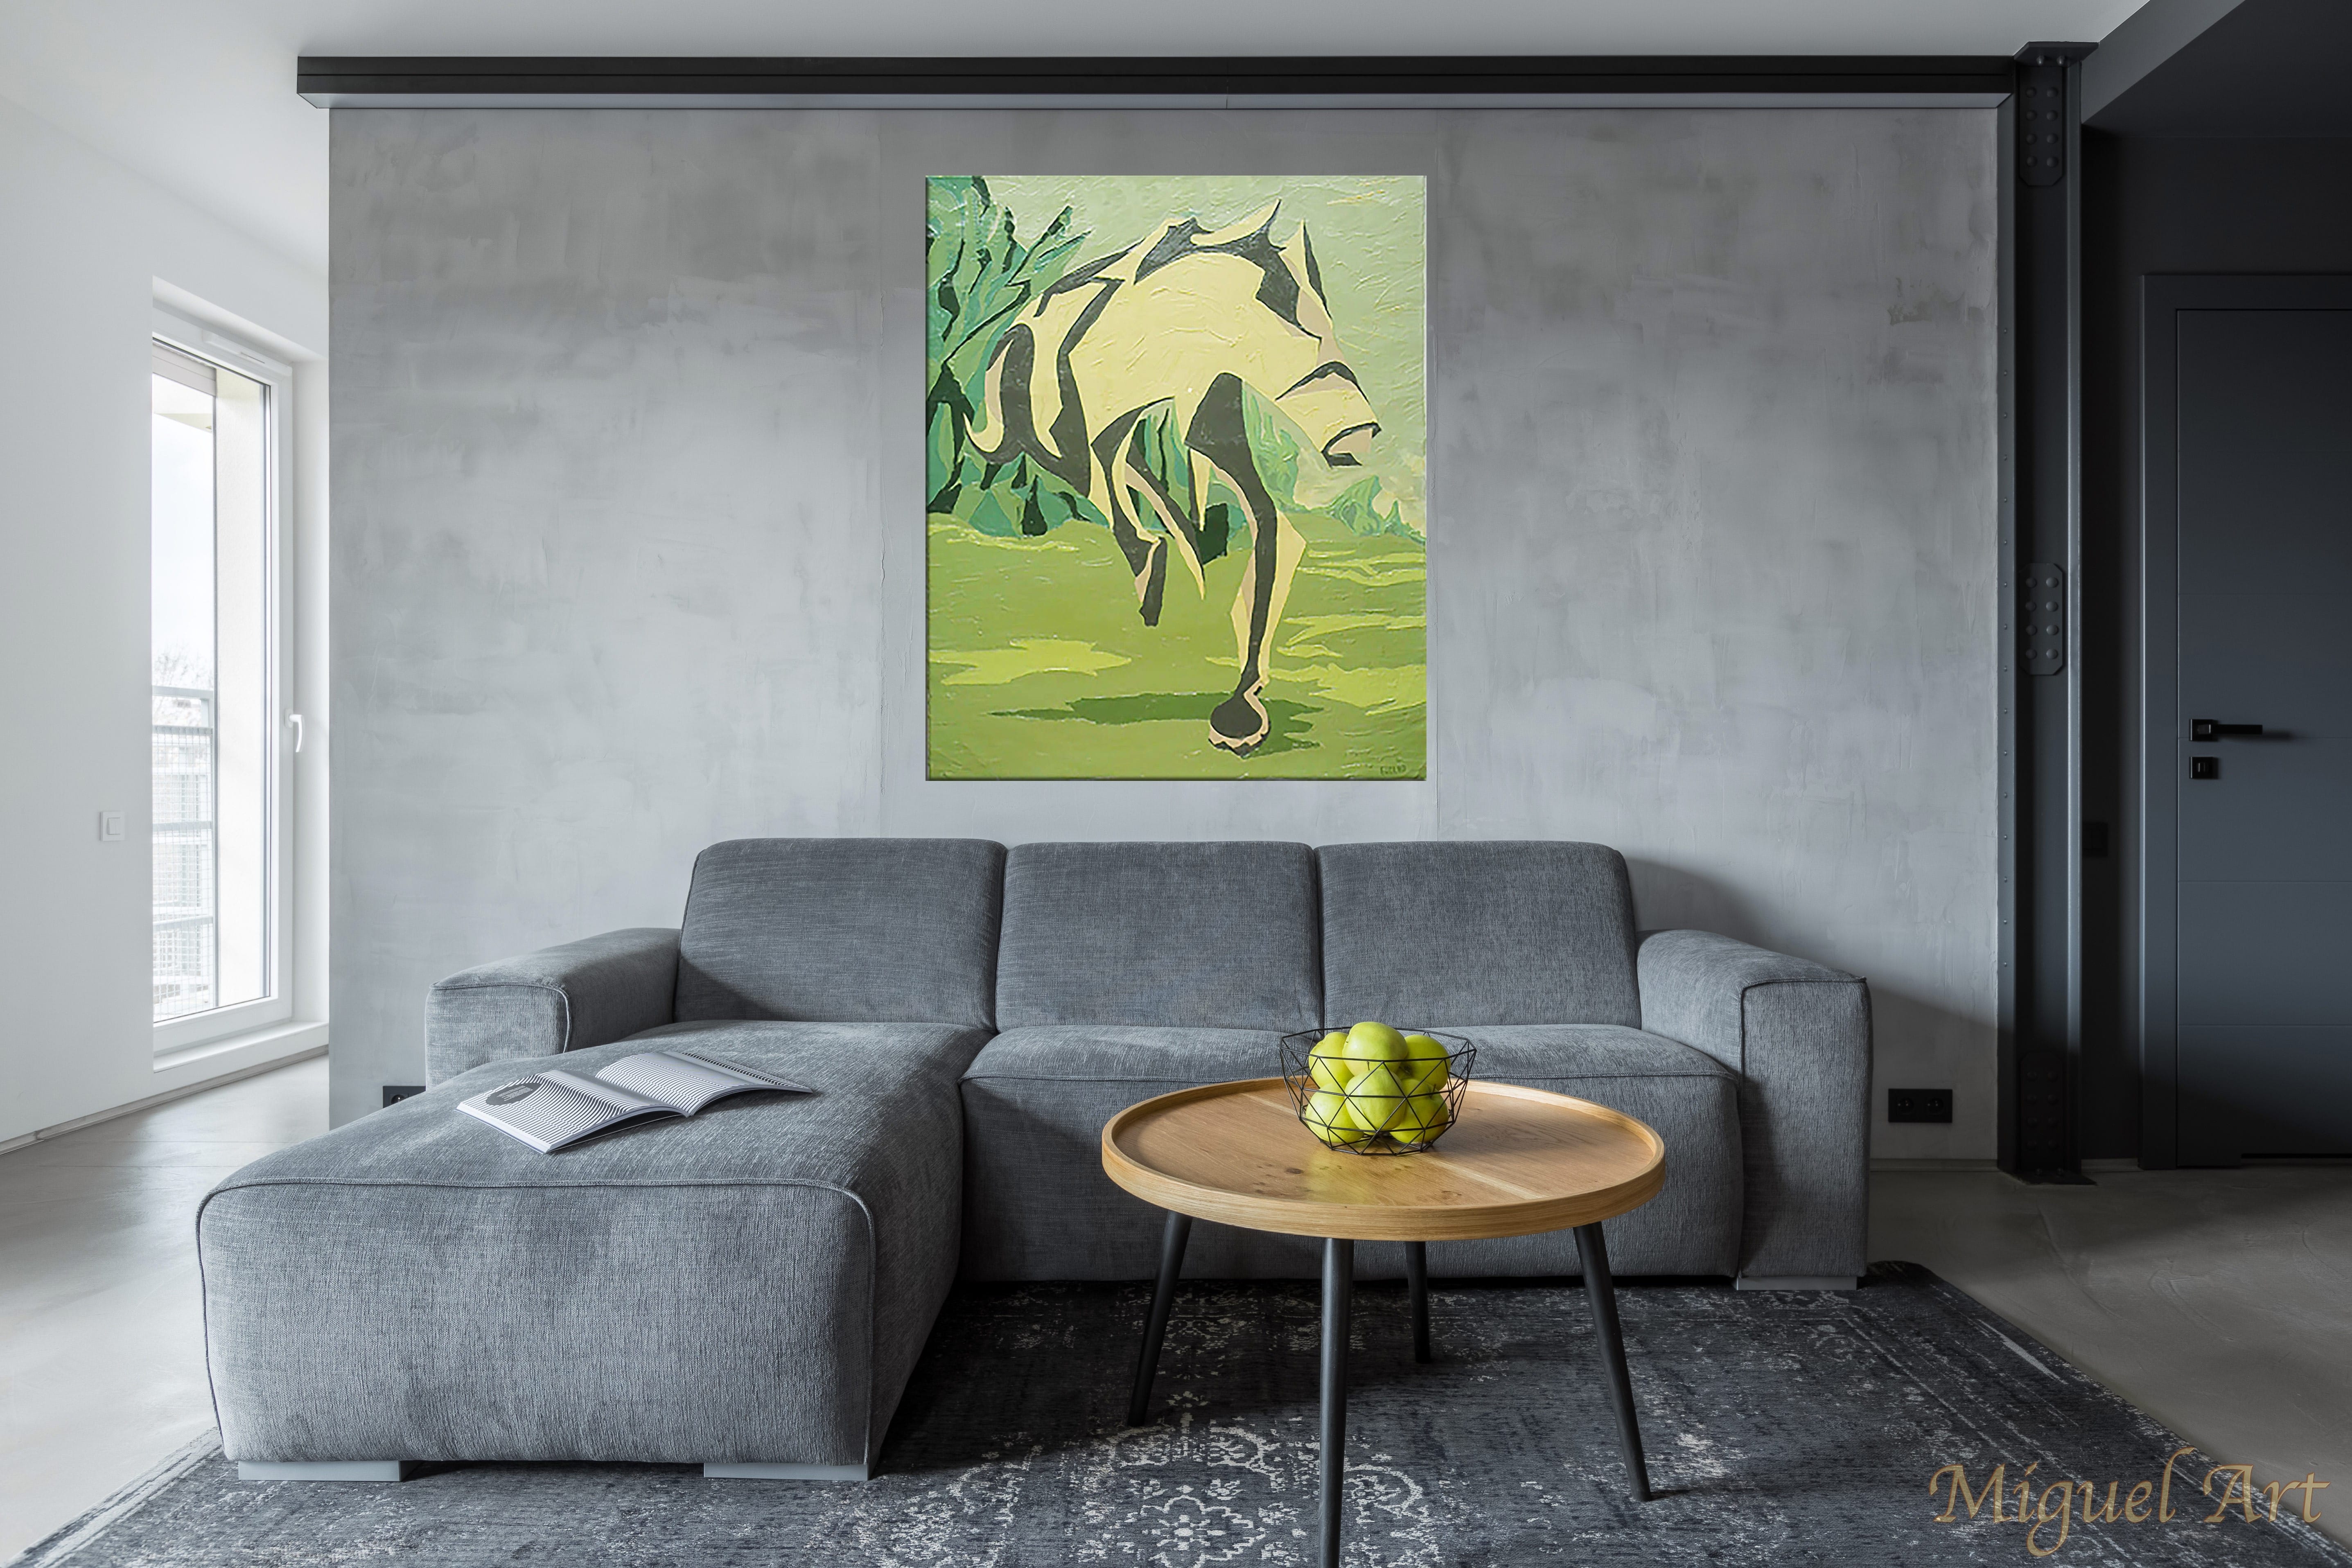 Painting of Cavalo displayed on the wall above a grey couch